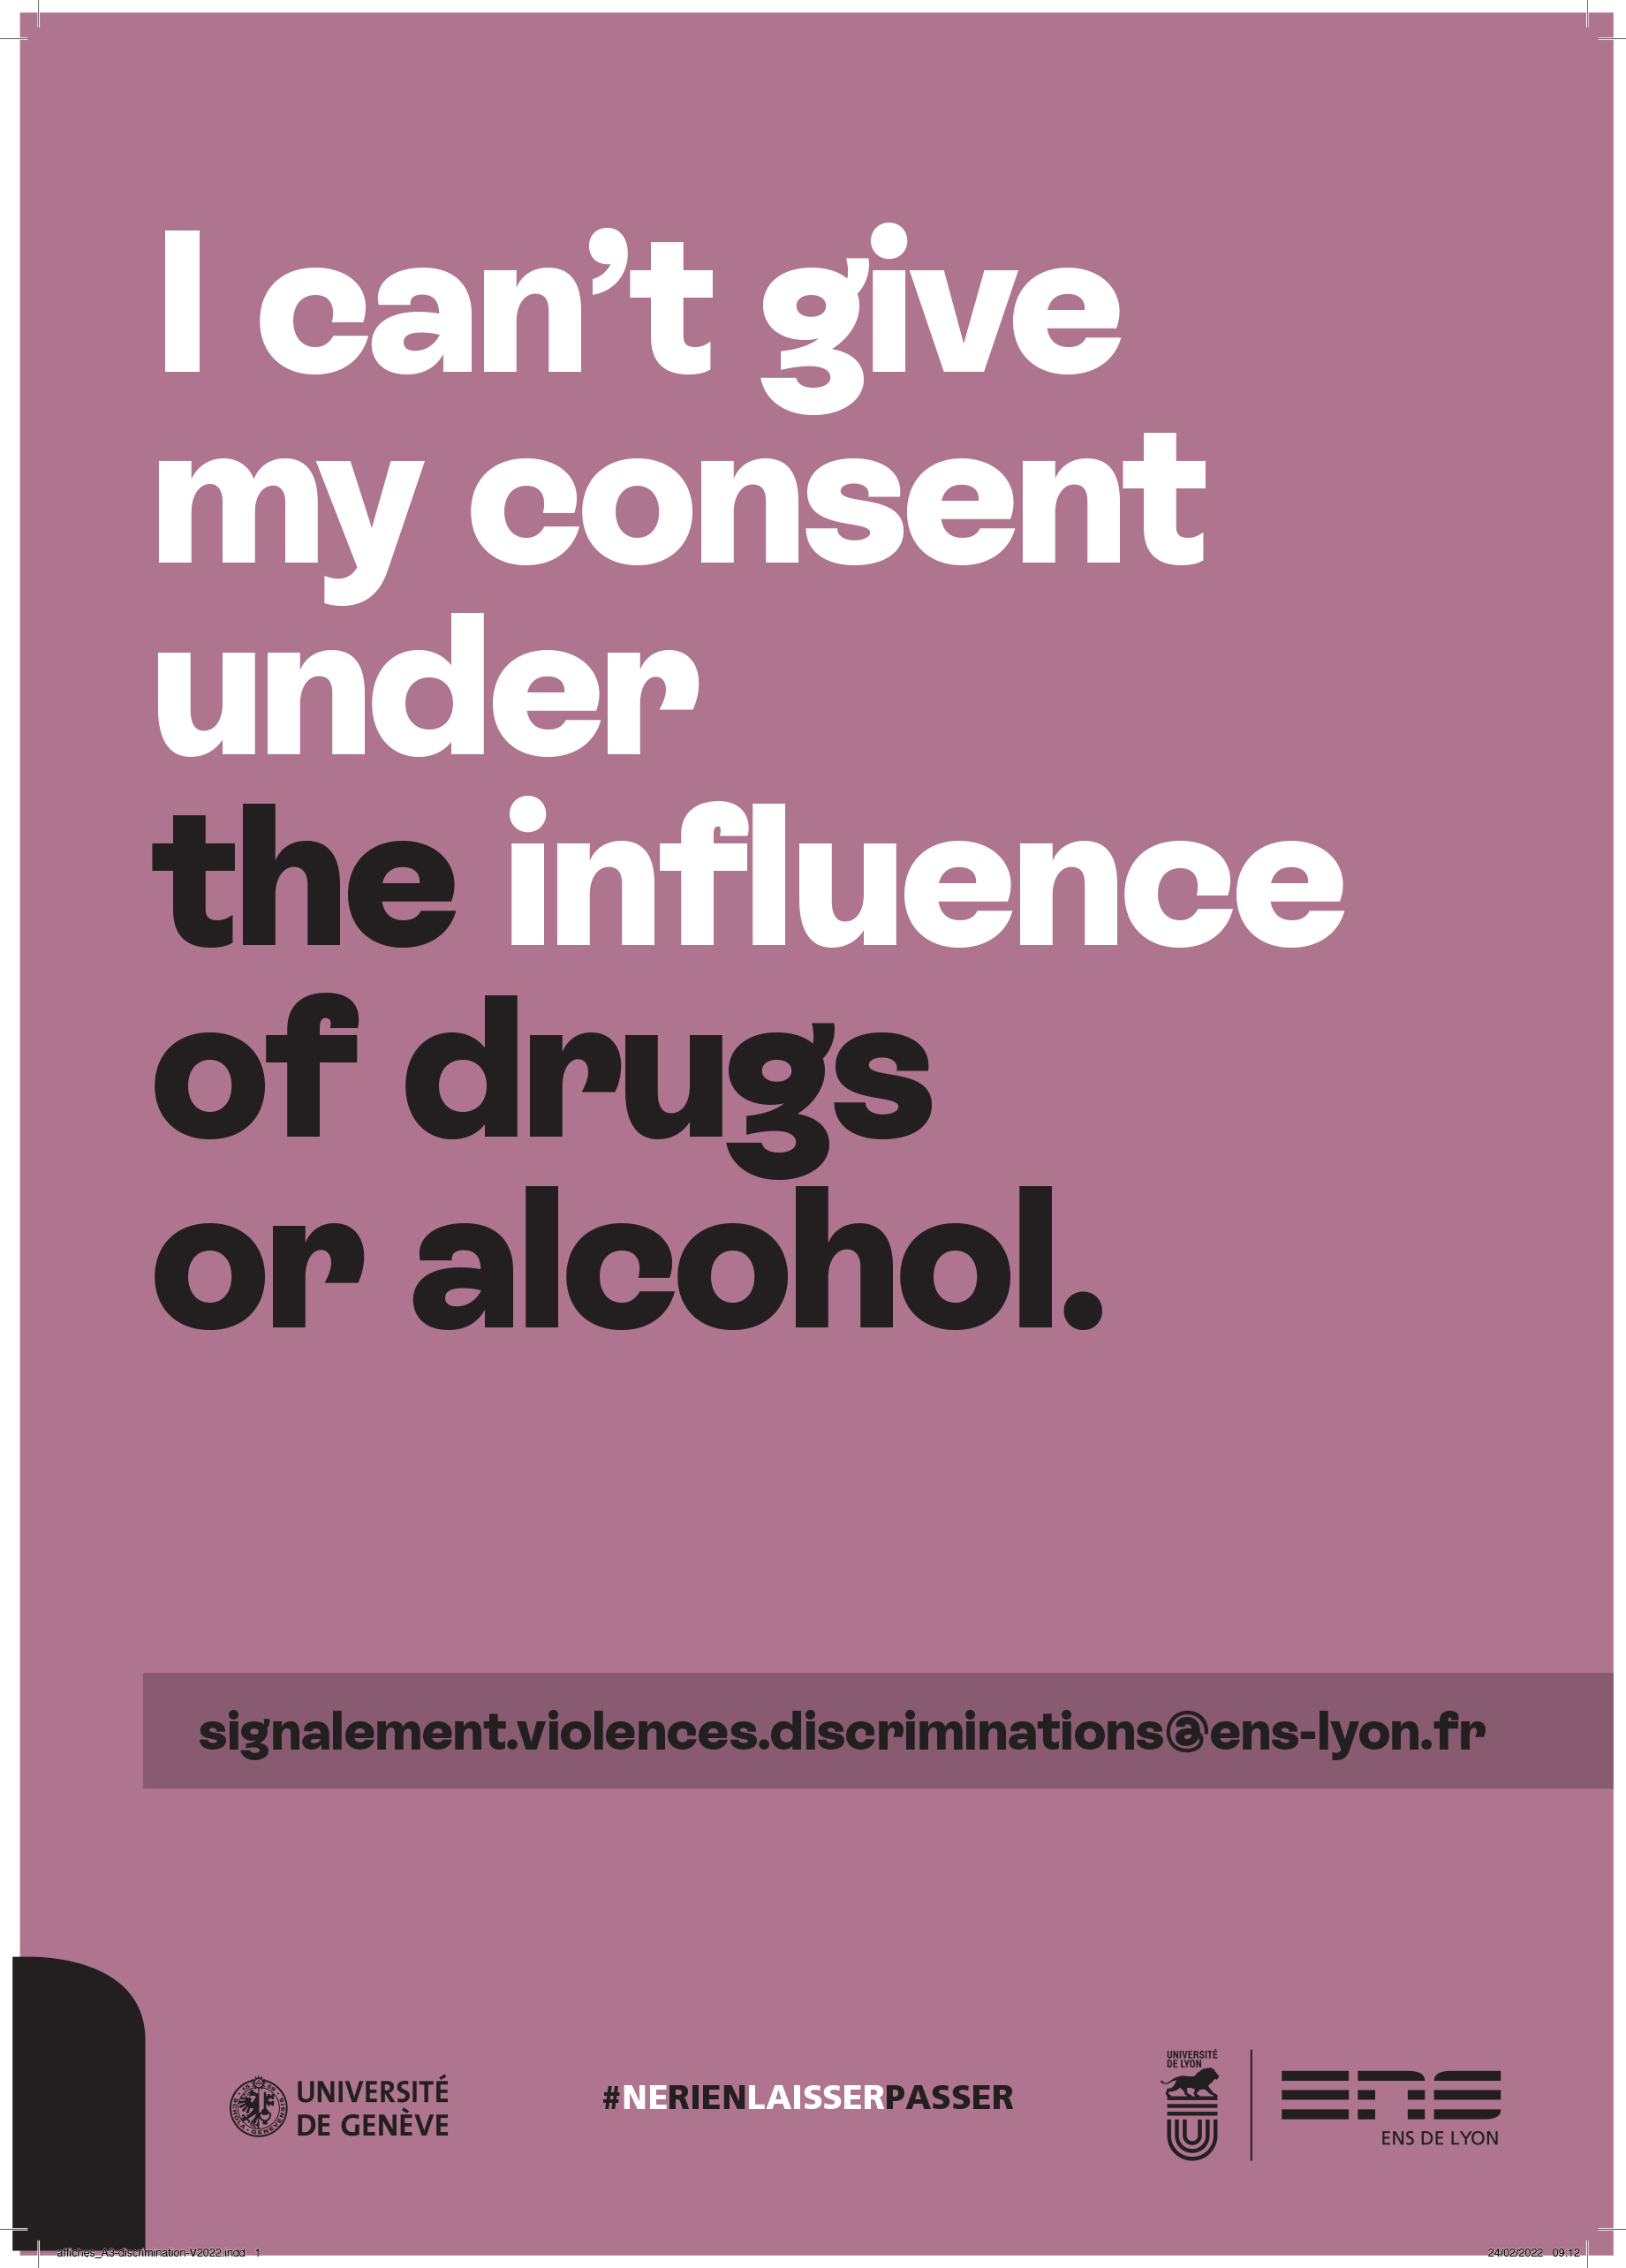 I can't give my consent under the influence of drugs or alcohol